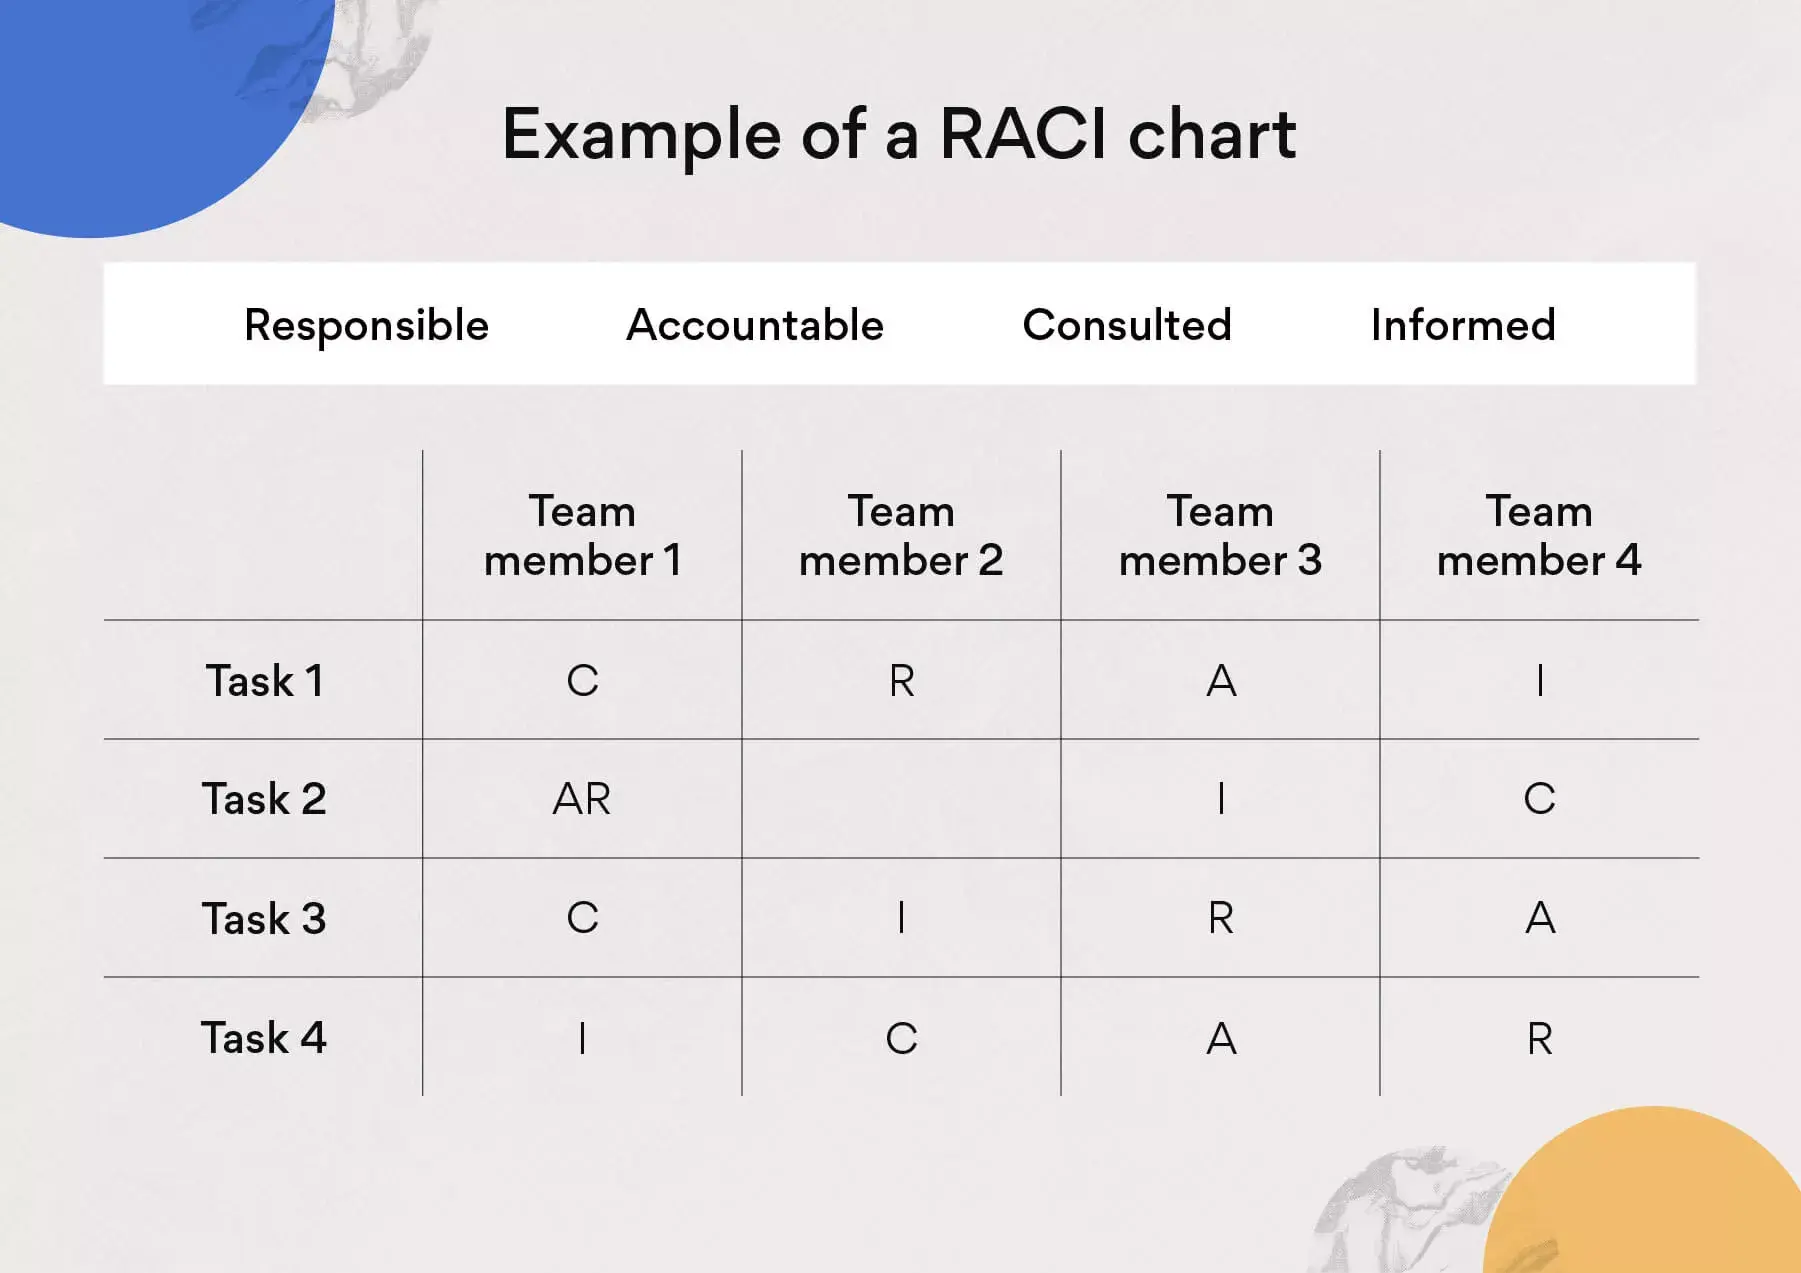 Example of a RACI chart